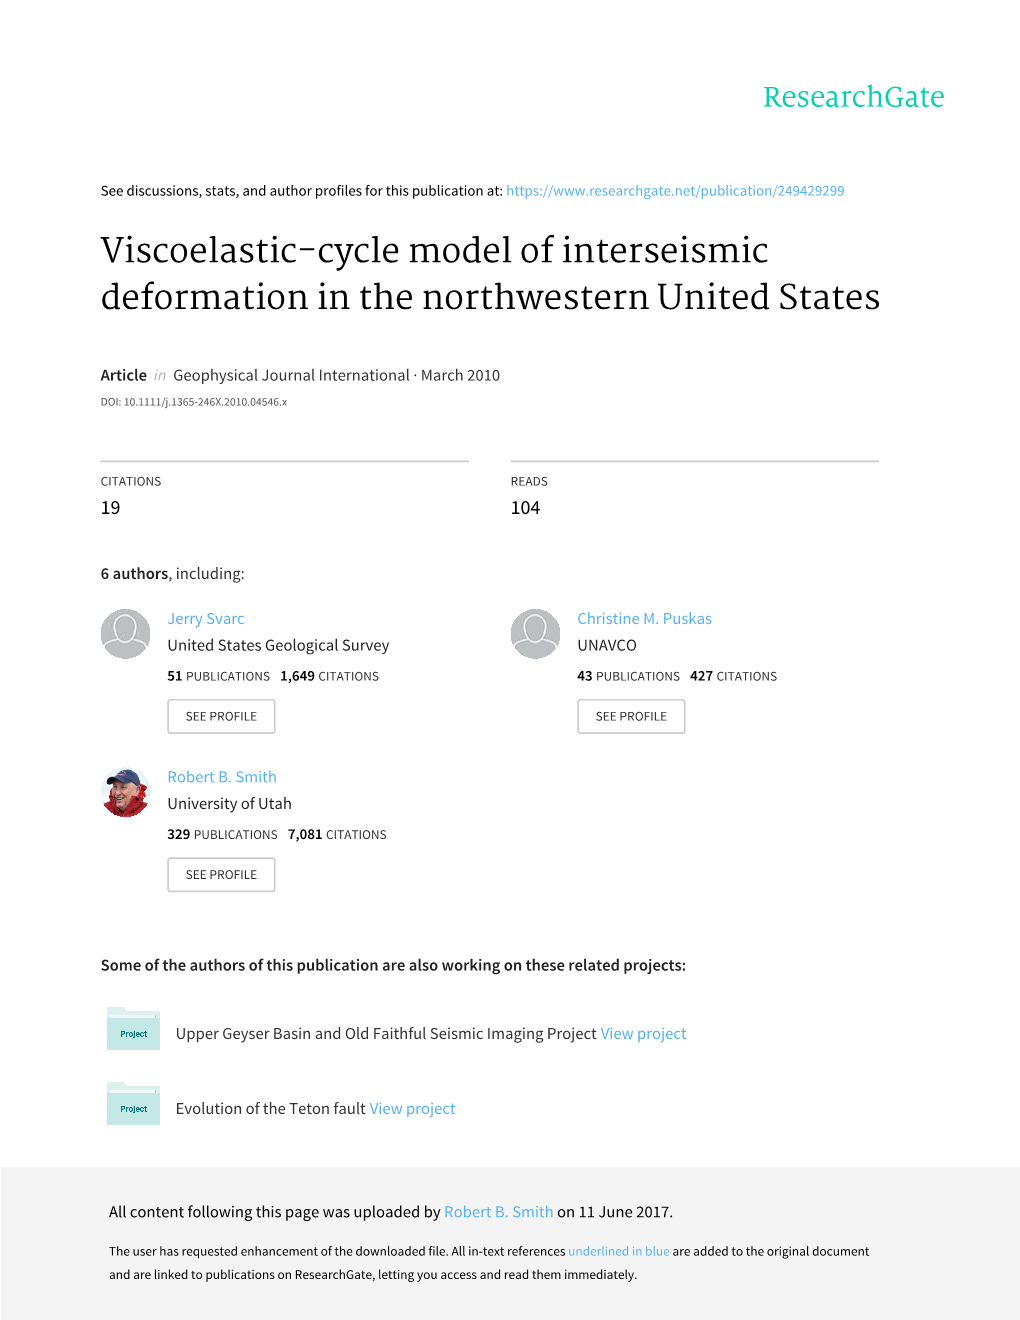 Viscoelastic-Cycle Model of Interseismic Deformation in the Northwestern United States